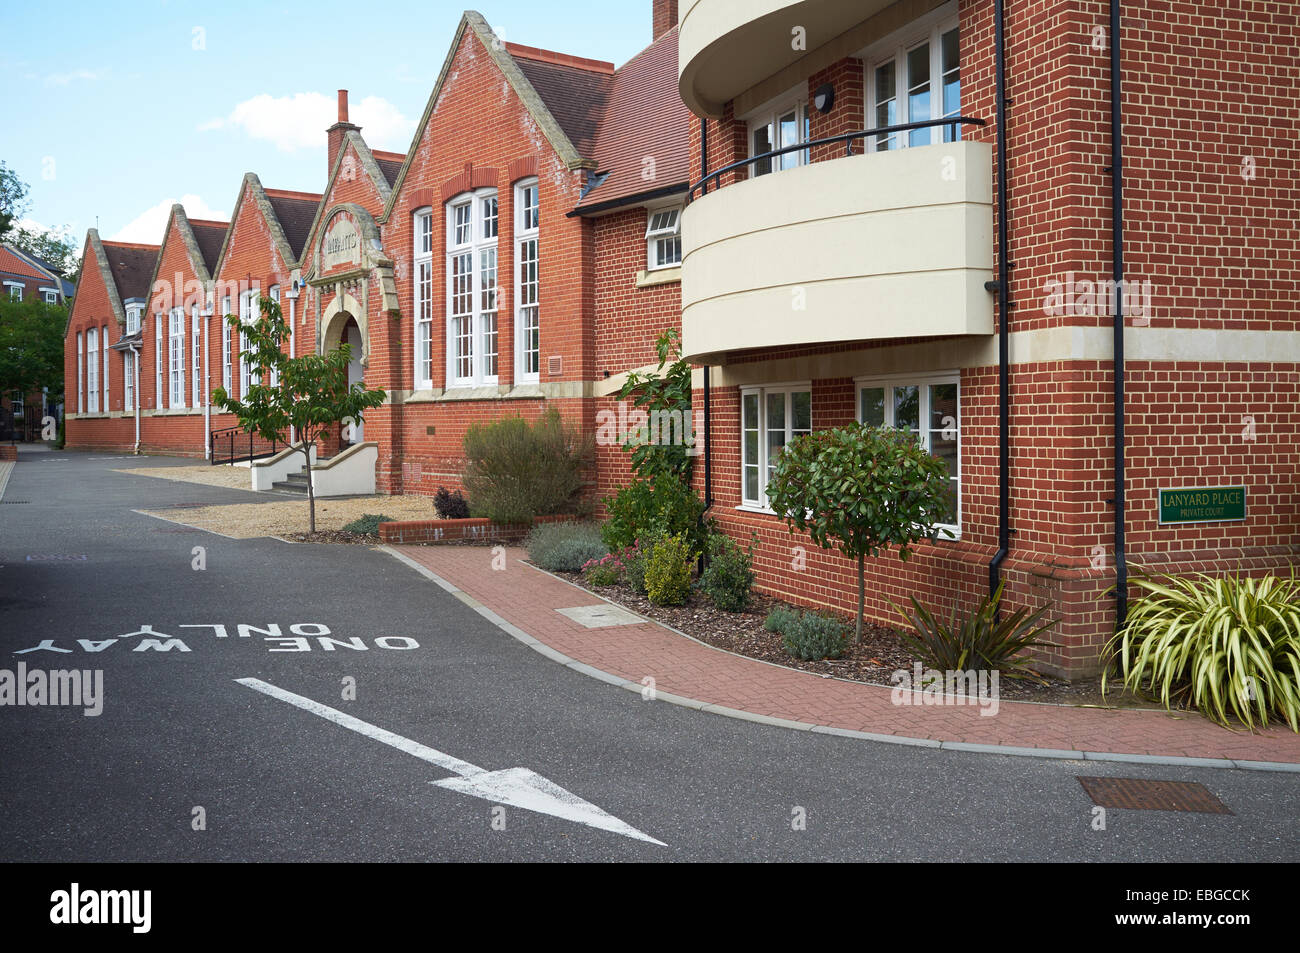 Lanyard Place, a residential development at the former Woodbridge primary school, Suffolk, UK. Stock Photo